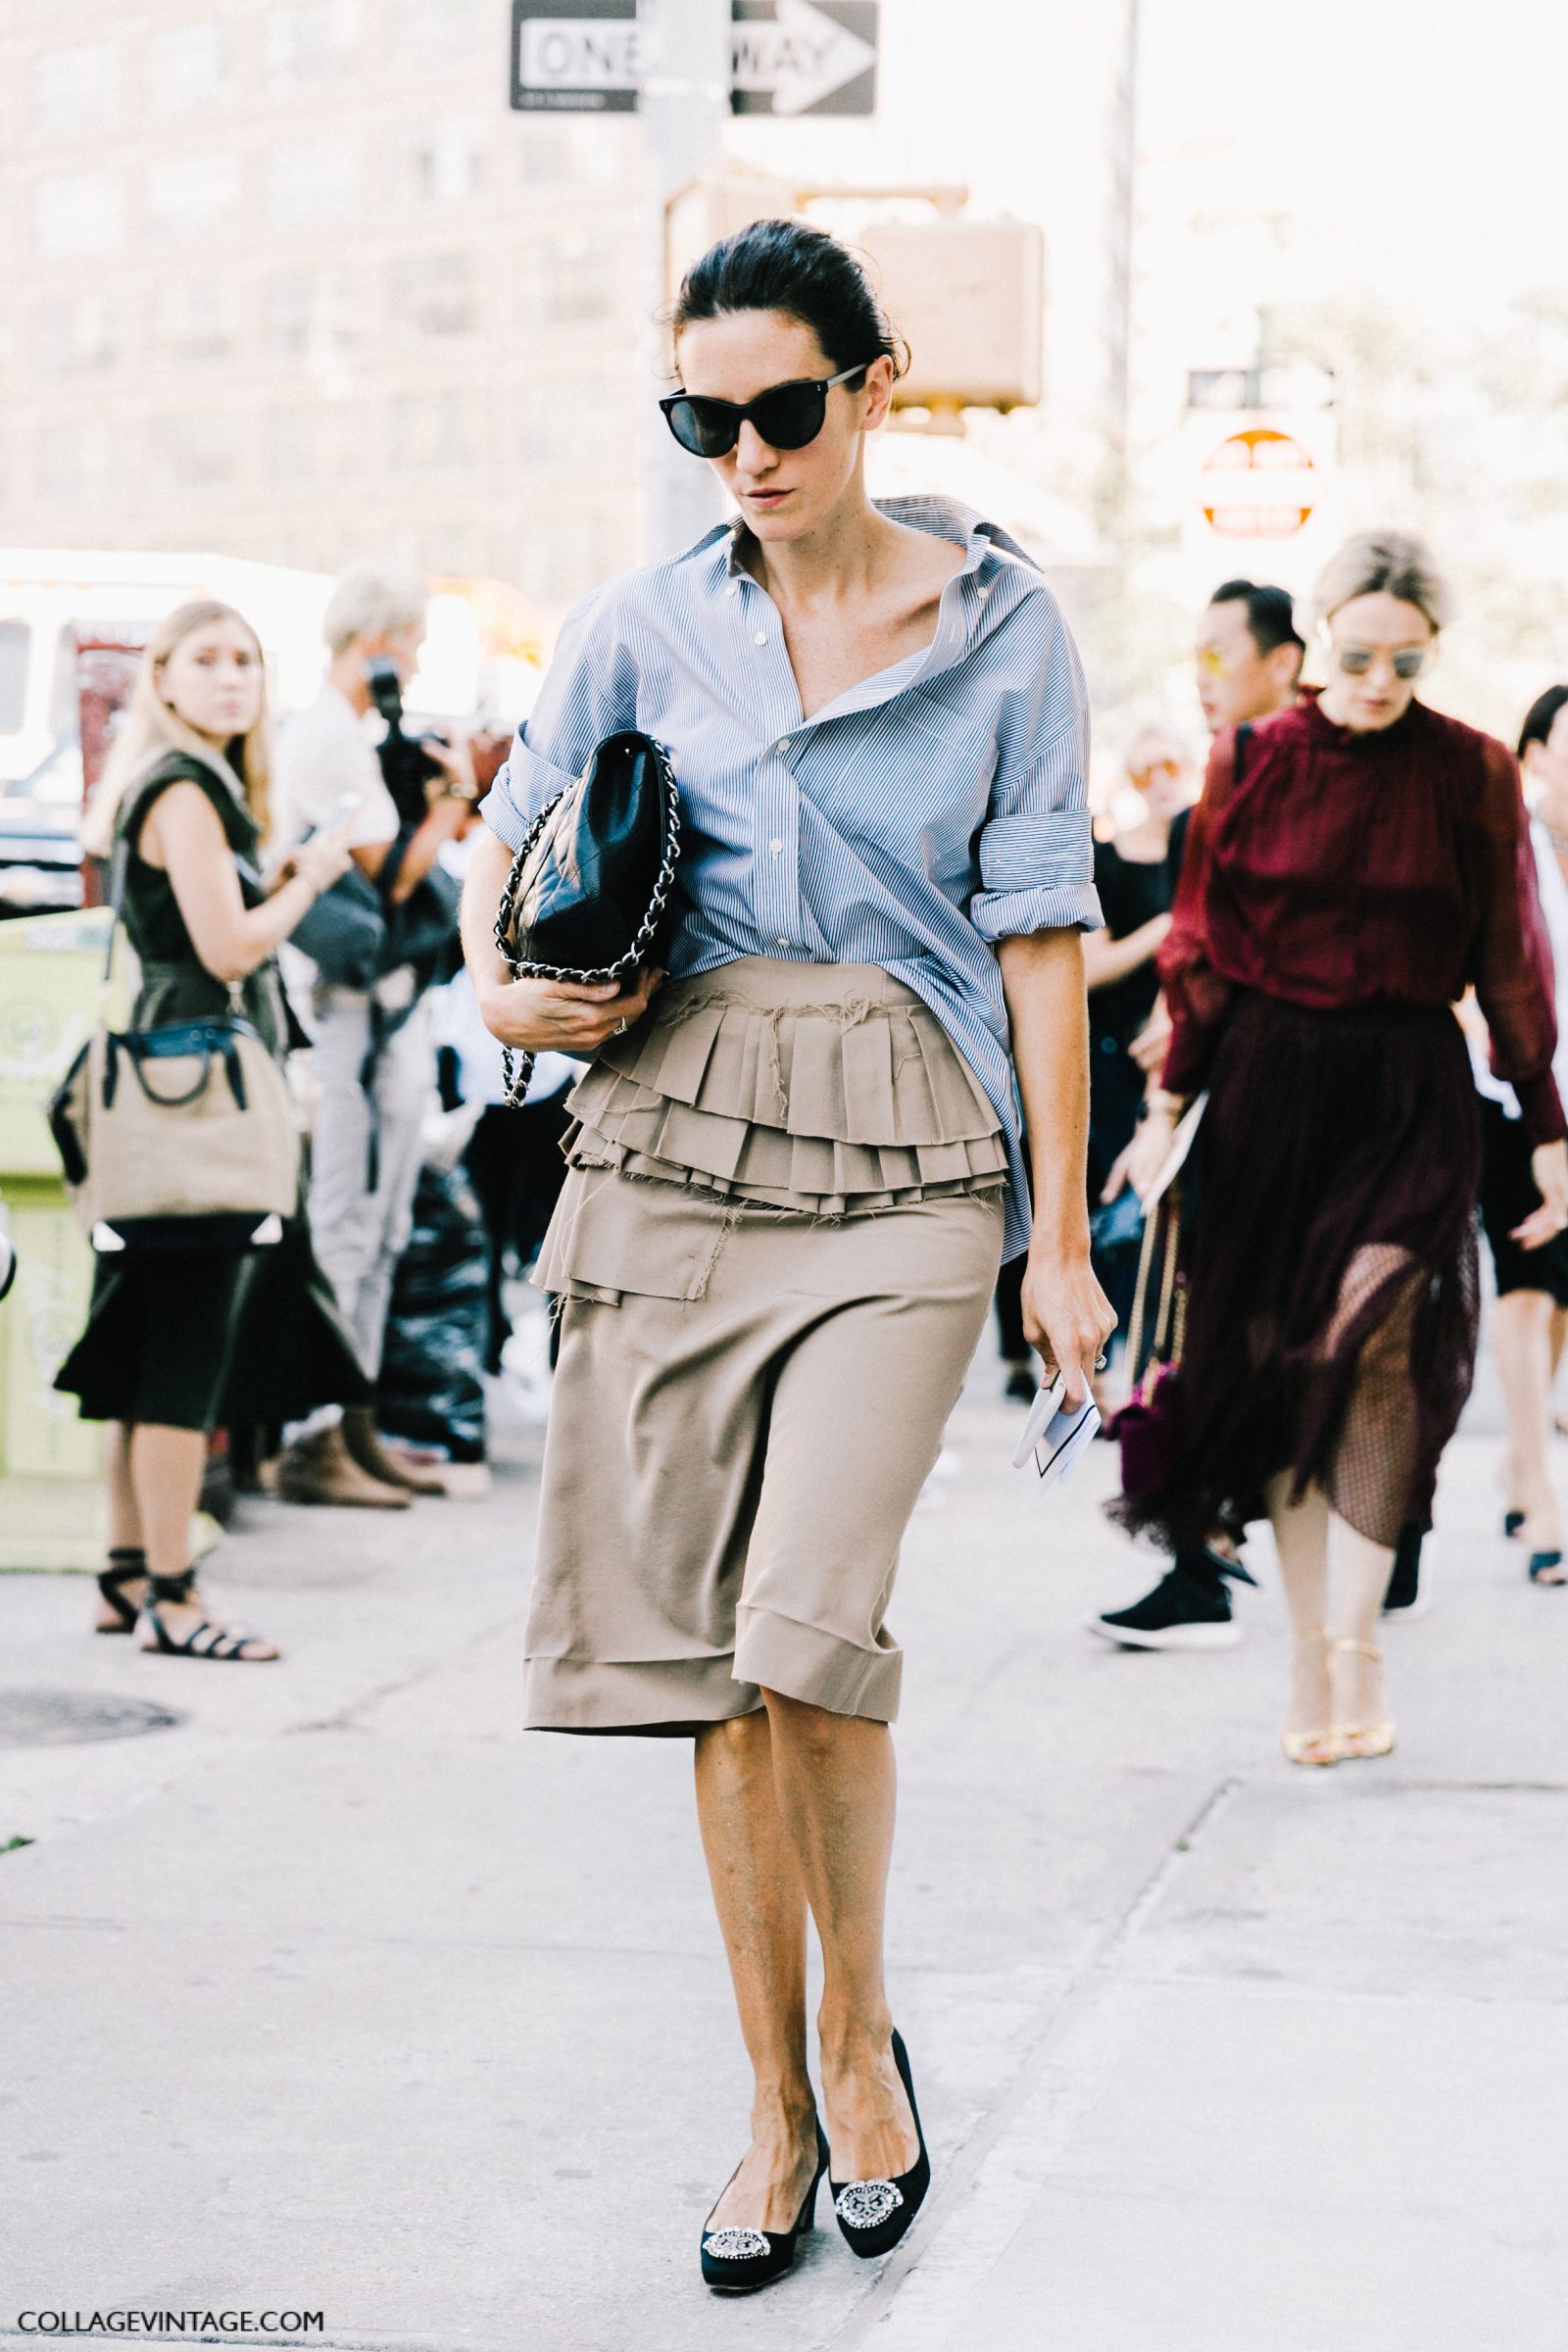 nyfw-new_york_fashion_week_ss17-street_style-outfits-collage_vintage-vintage-del_pozo-michael_kors-hugo_boss-35